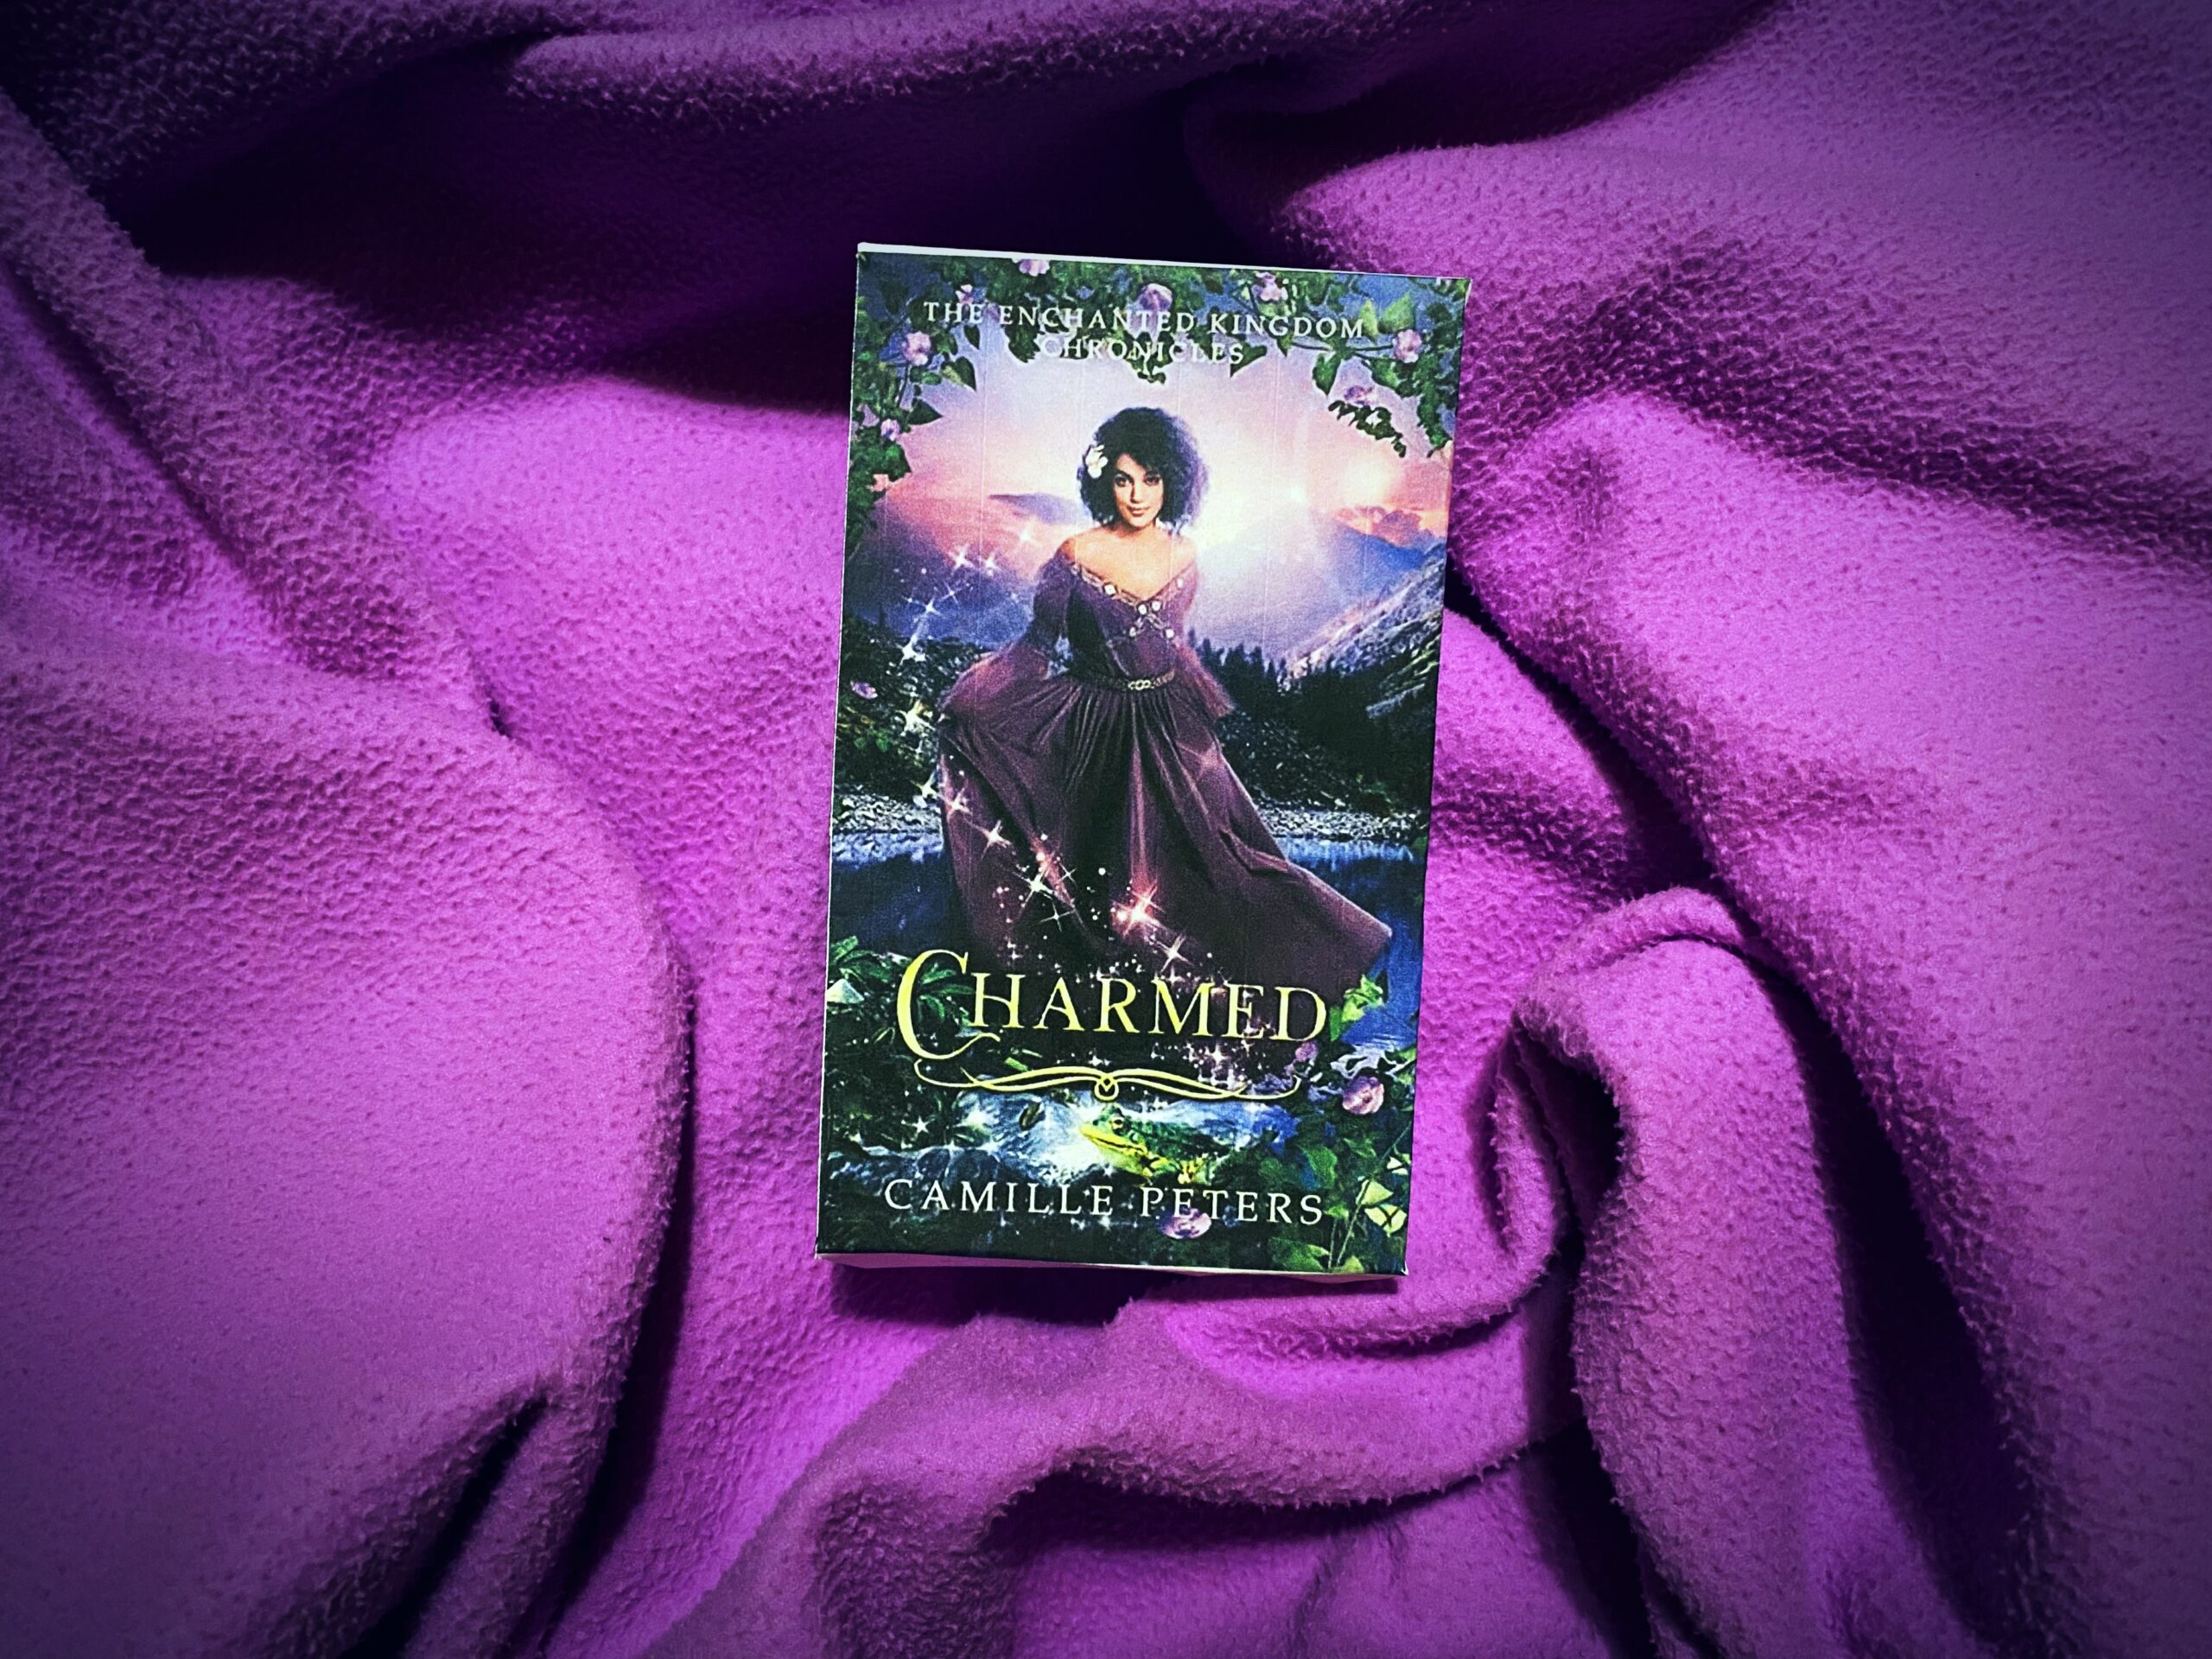 Charmed by Camille Peters